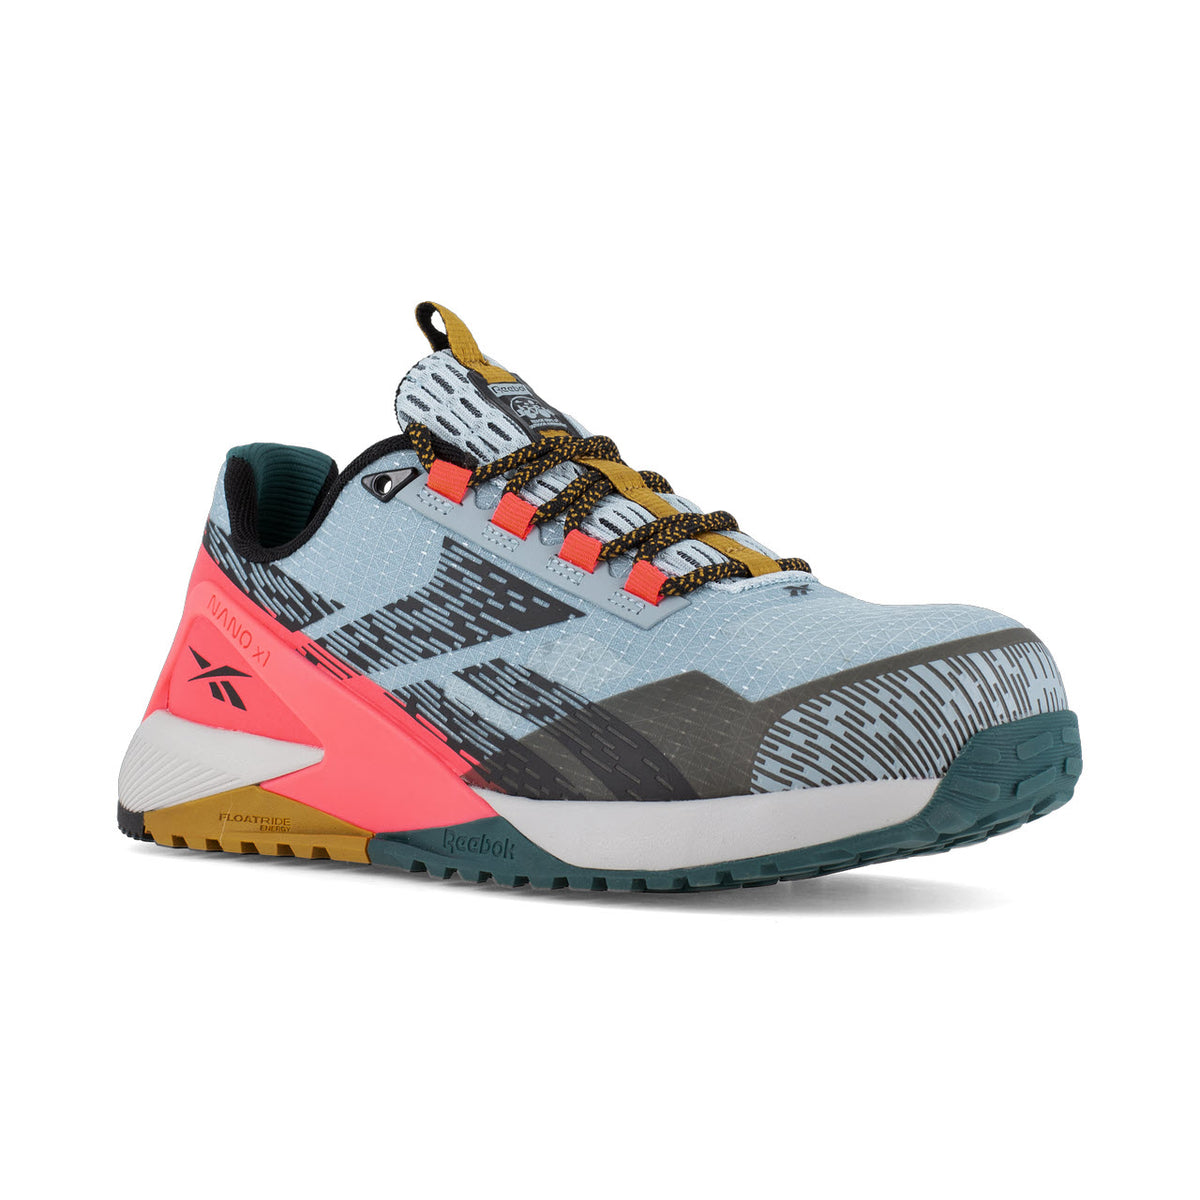 A modern hiking shoe with a multicolor design featuring gray, pink, and teal, showcasing a Reebok Work Nano X1 Adventure rugged sole and durable laces.